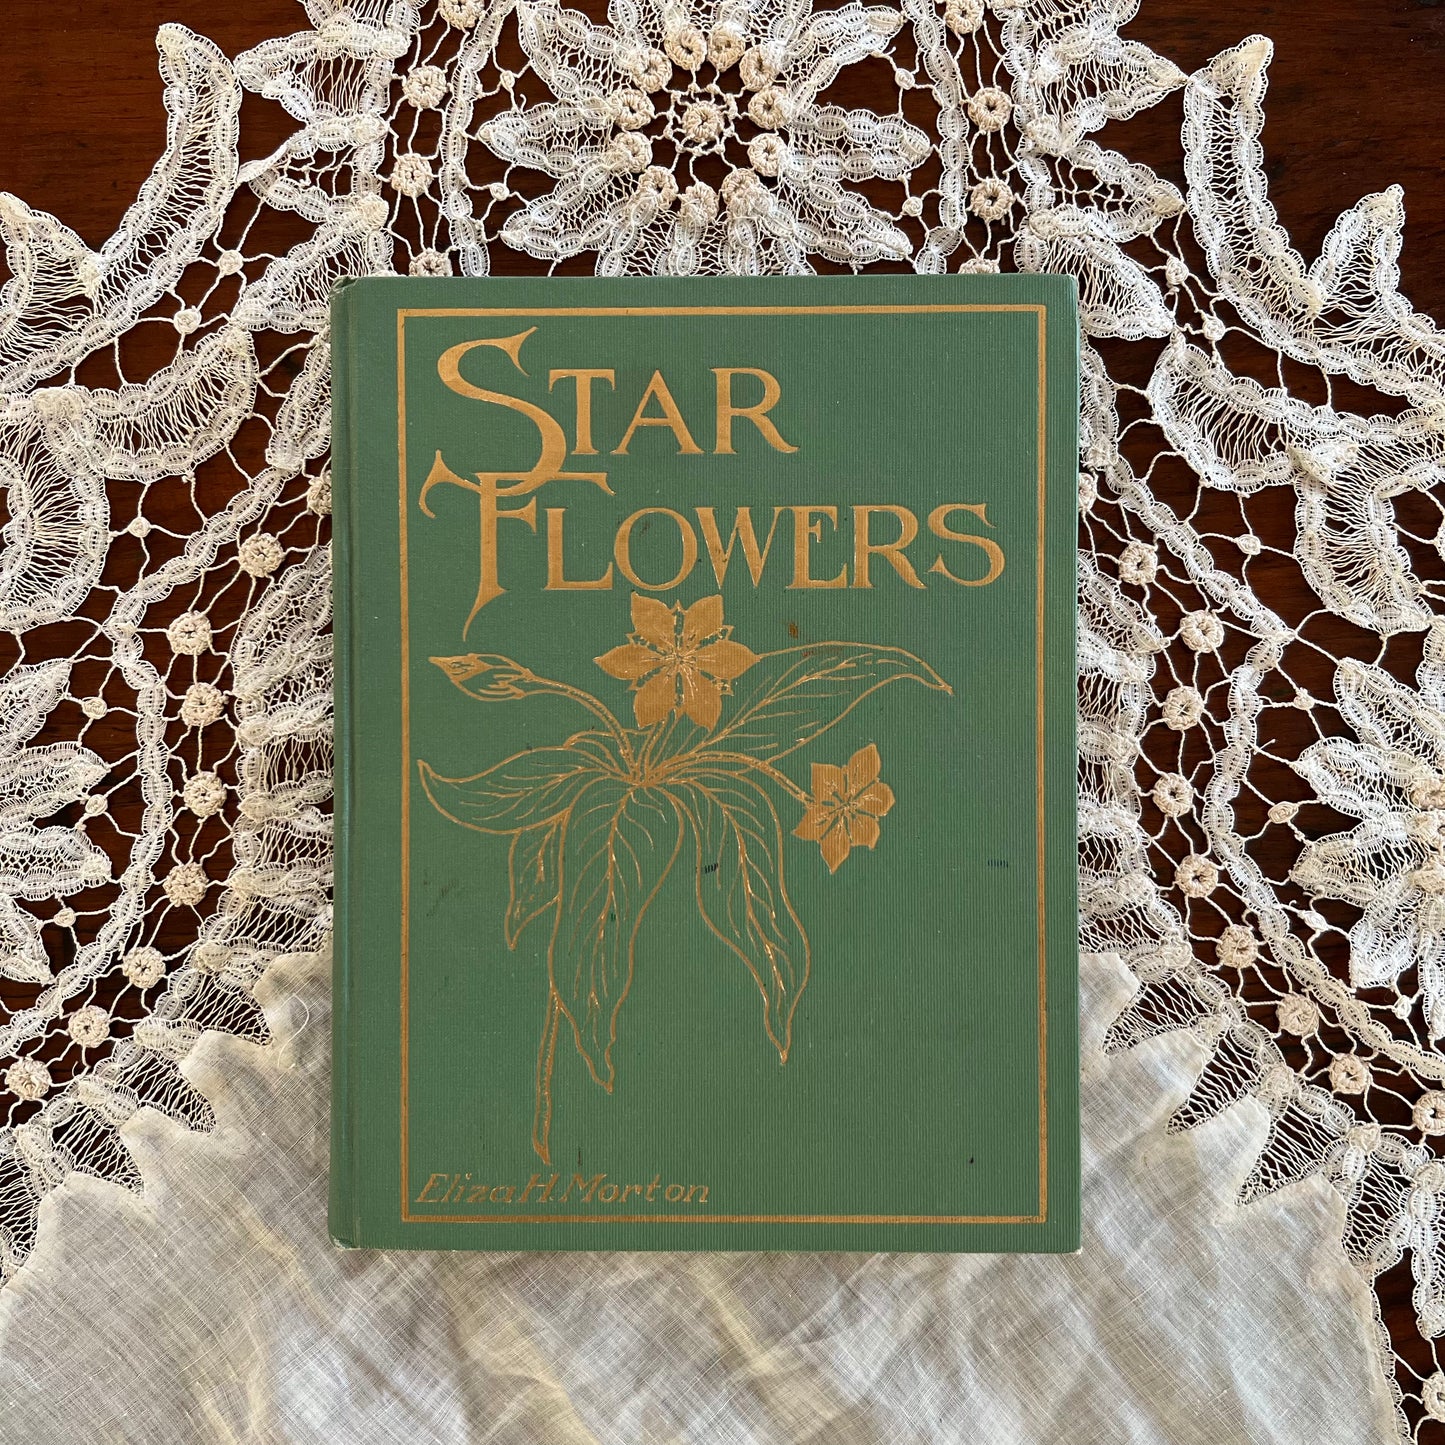 Star Flowers By Eliza H. Morton First Ed. 1912 Poetry Book